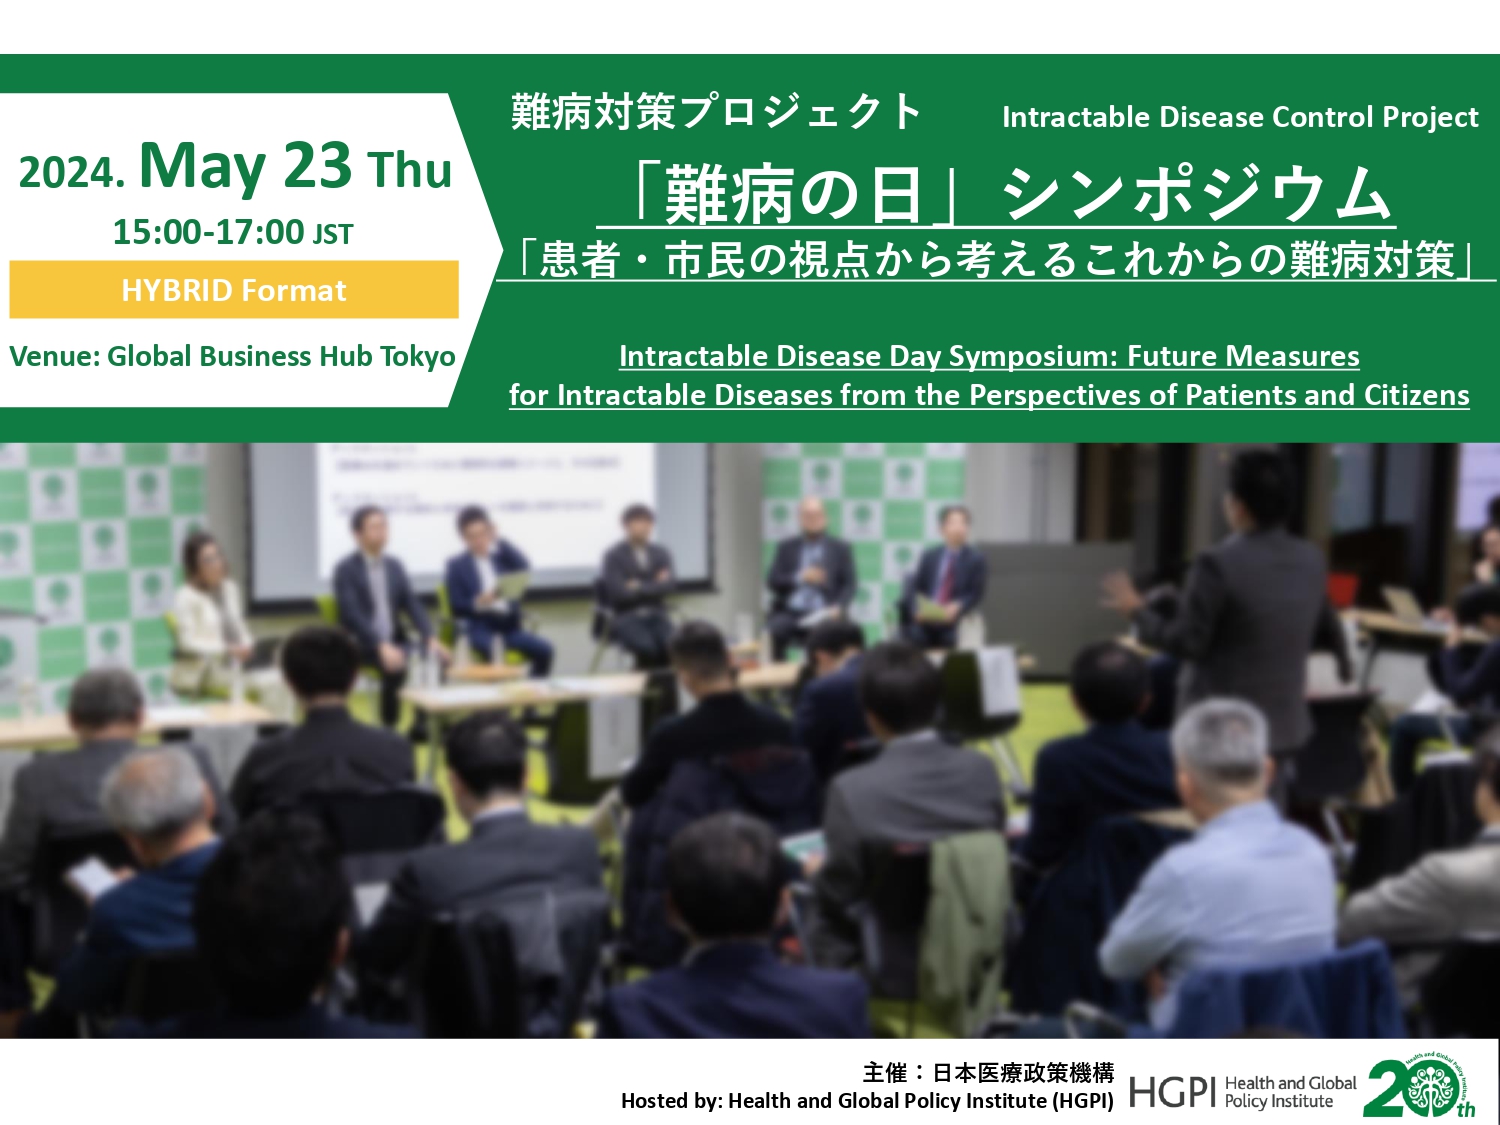 [Event Announcement] (Hybrid Format) Intractable Disease Day Symposium: Future Measures for Intractable Diseases from the Perspectives of Patients and Citizens (May, 23 2024)